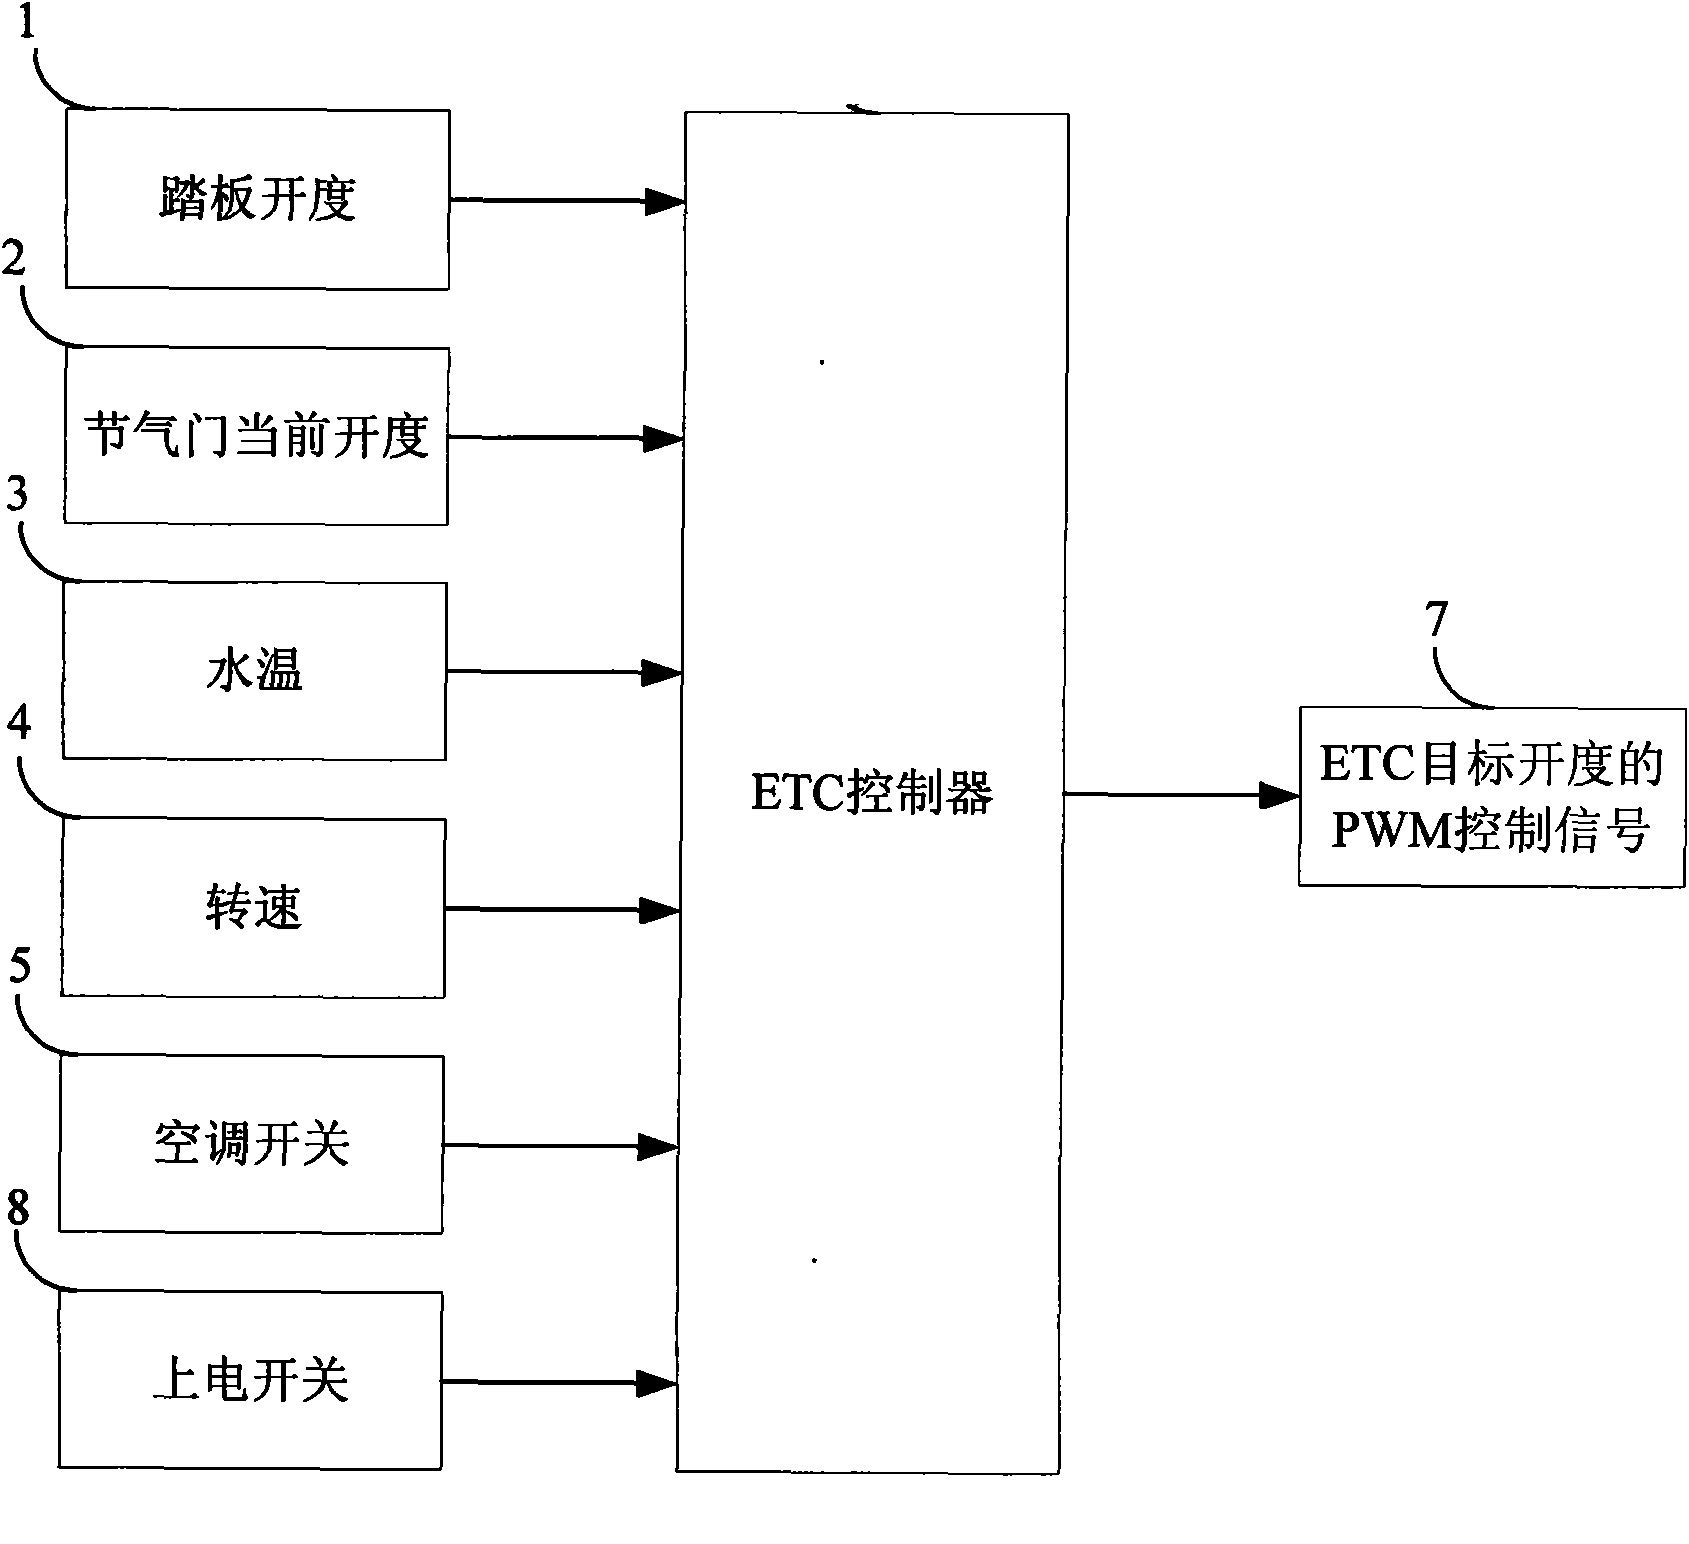 Electronic throttle controller of electronically controlled engine